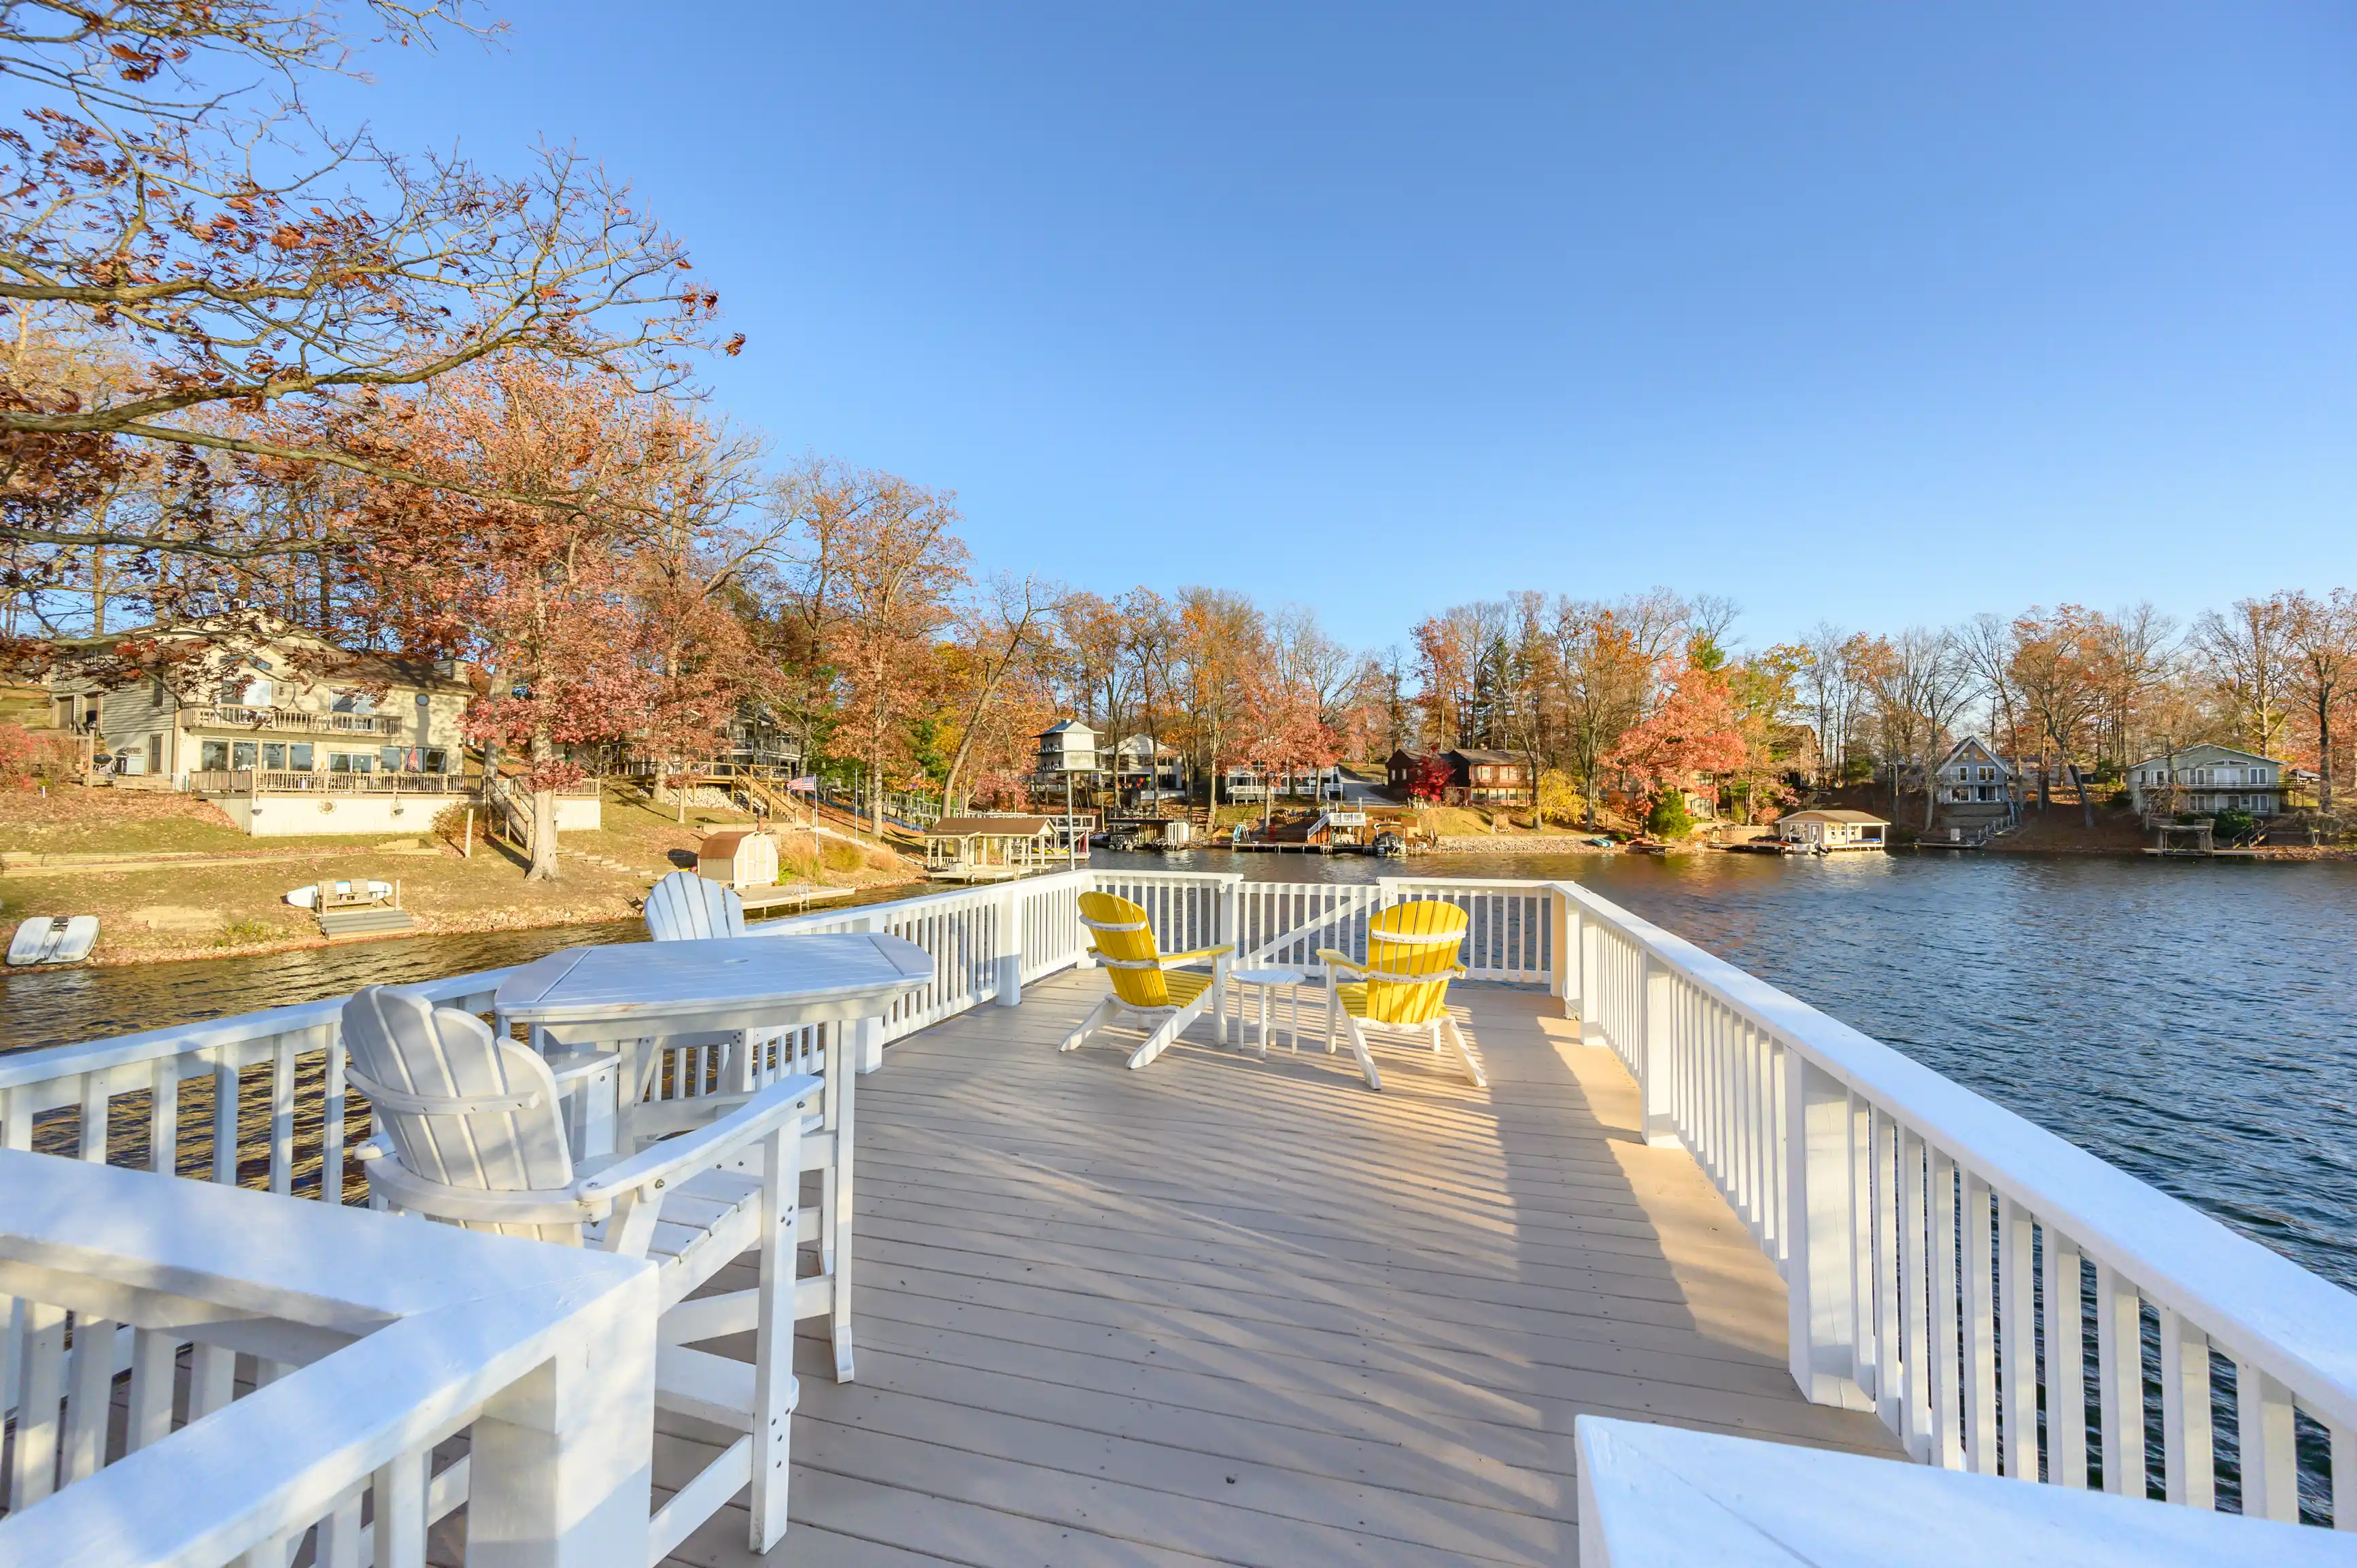 Alt text: A spacious wooden deck with white railing overlooking a tranquil lake with autumn trees and houses along the shore, featuring several Adirondack chairs for relaxation.